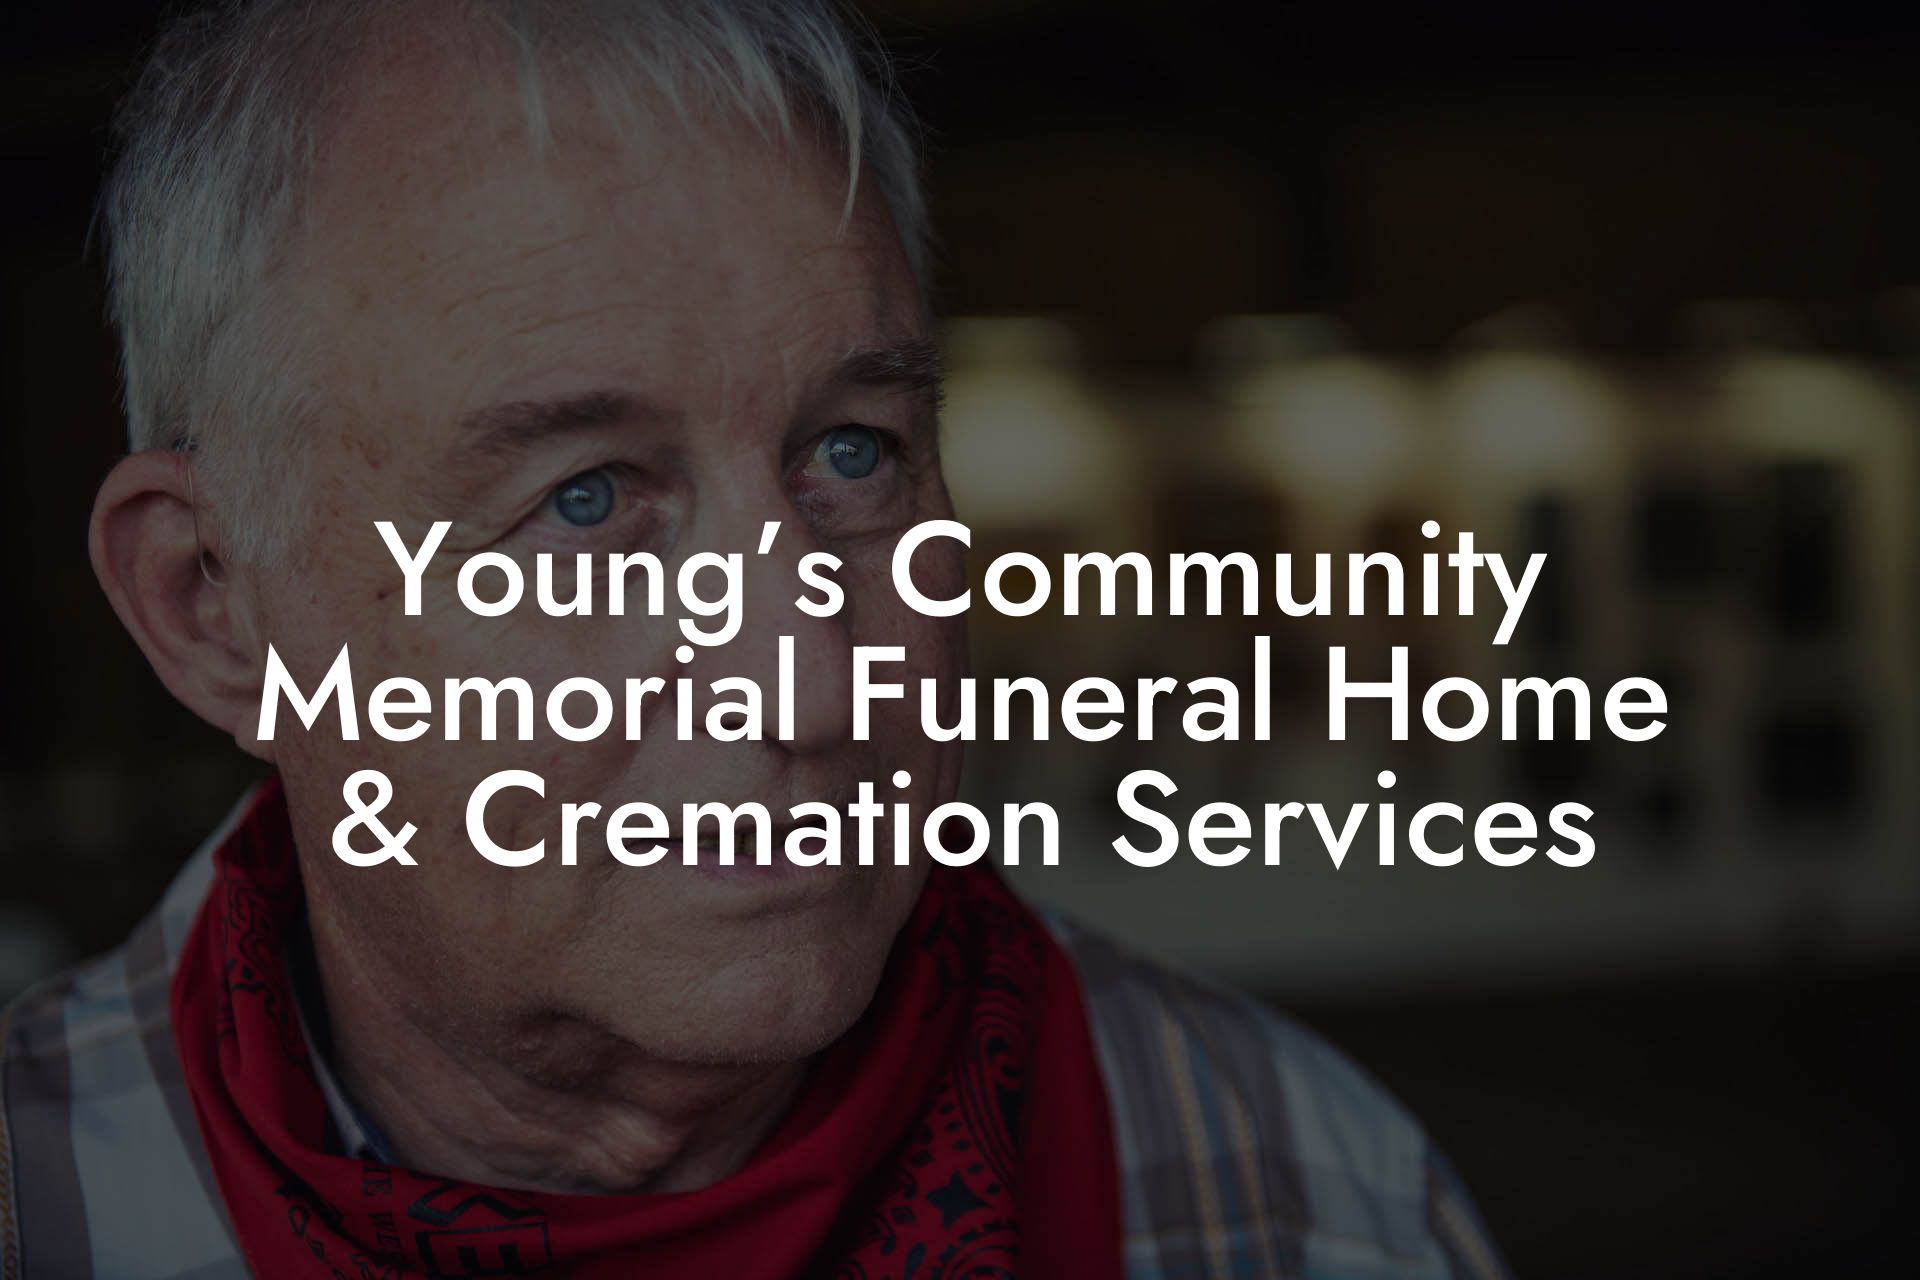 Young’s Community Memorial Funeral Home & Cremation Services Eulogy